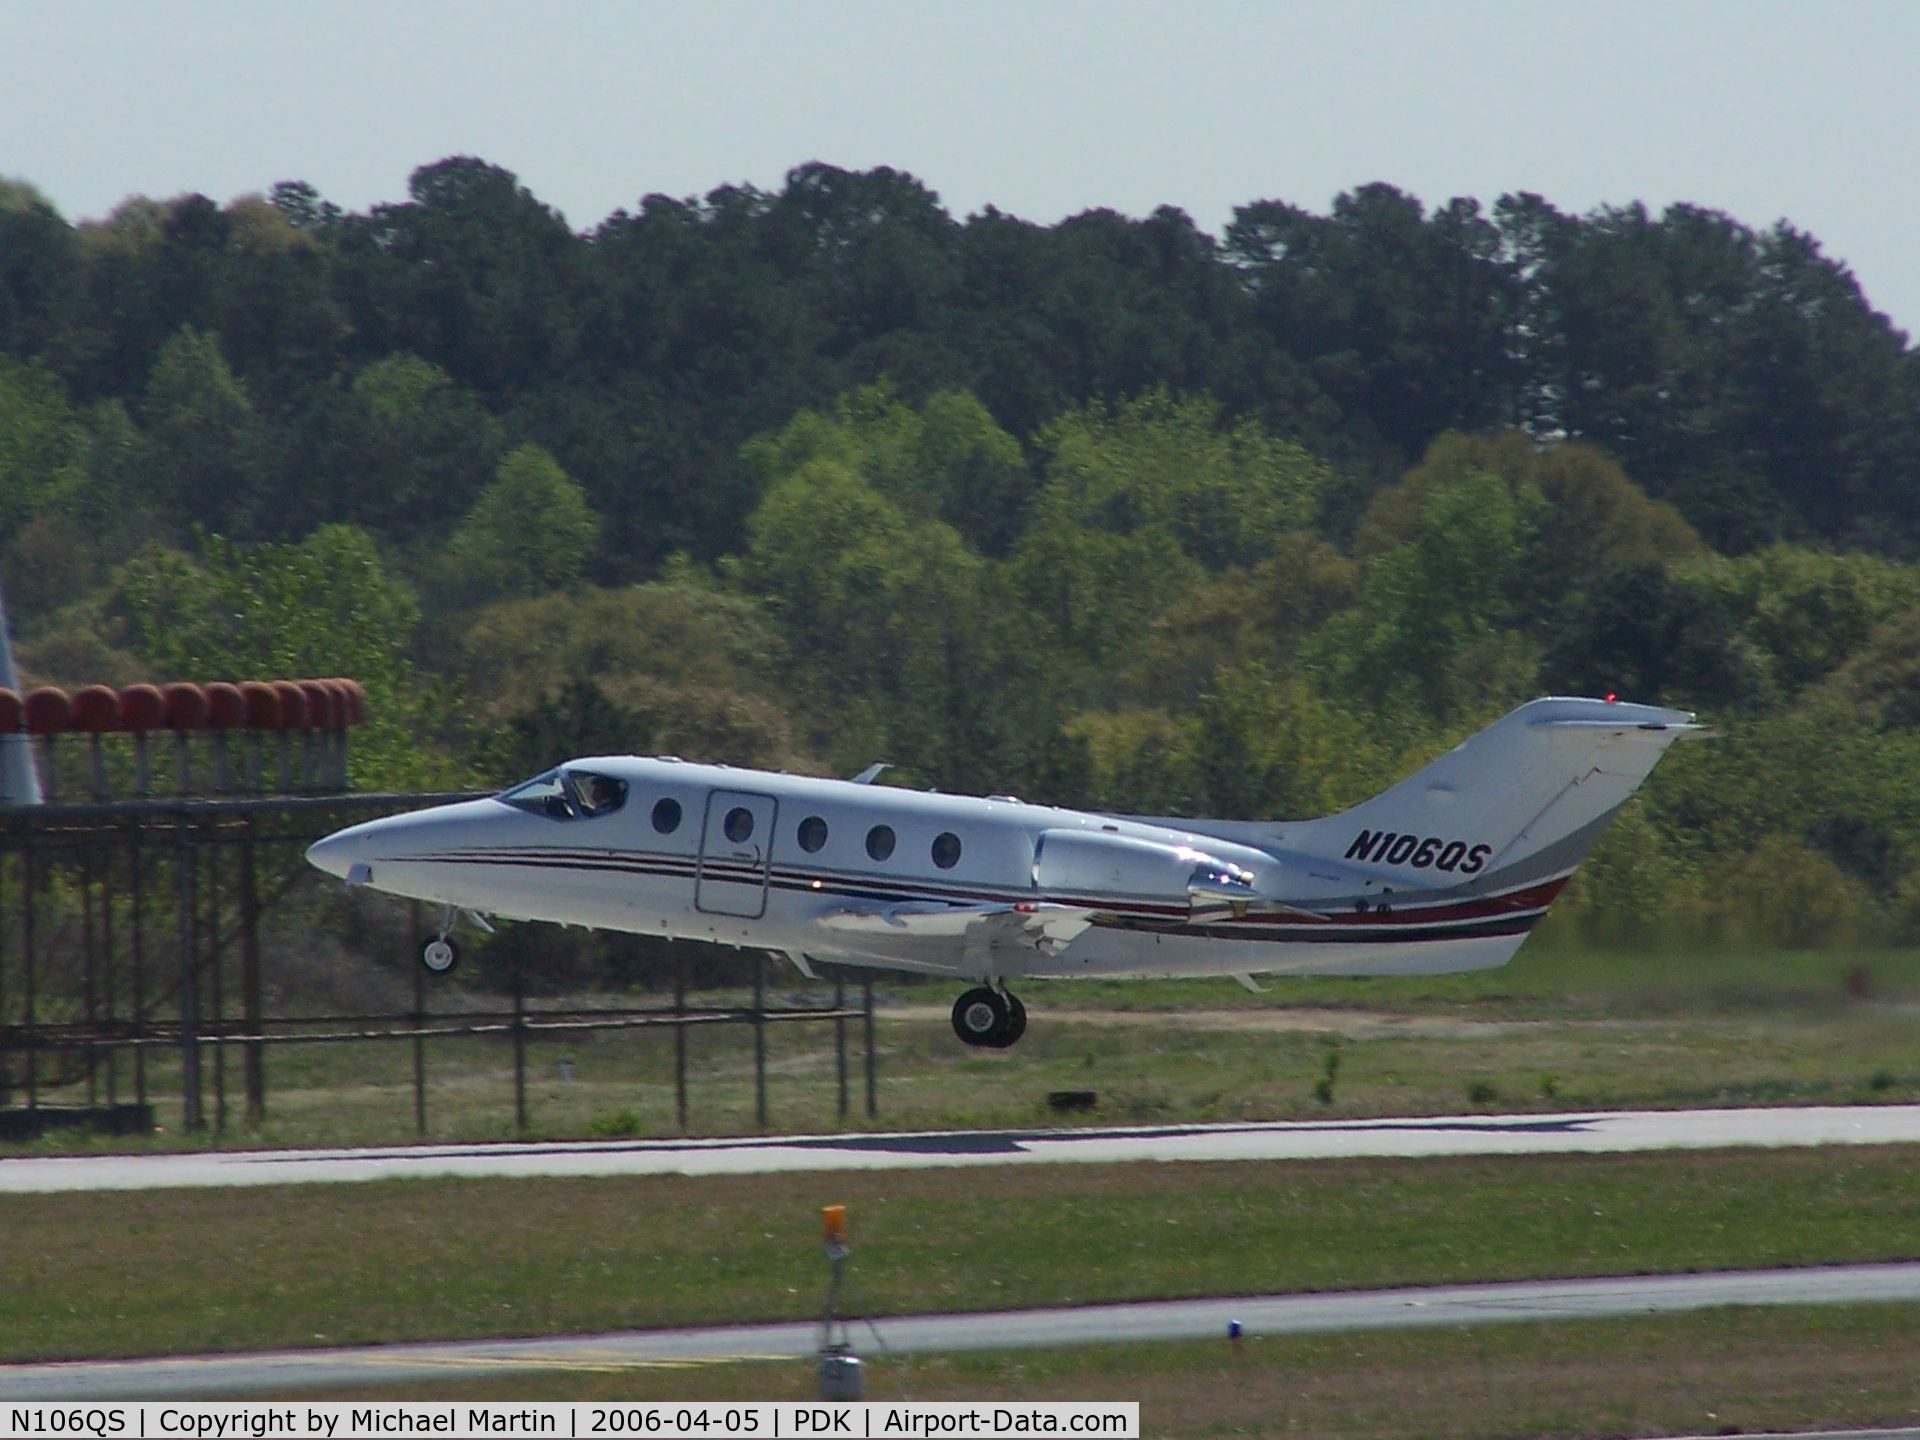 N106QS, Raytheon Aircraft Company 400A C/N RK-381, Departing PDK in a hurry!